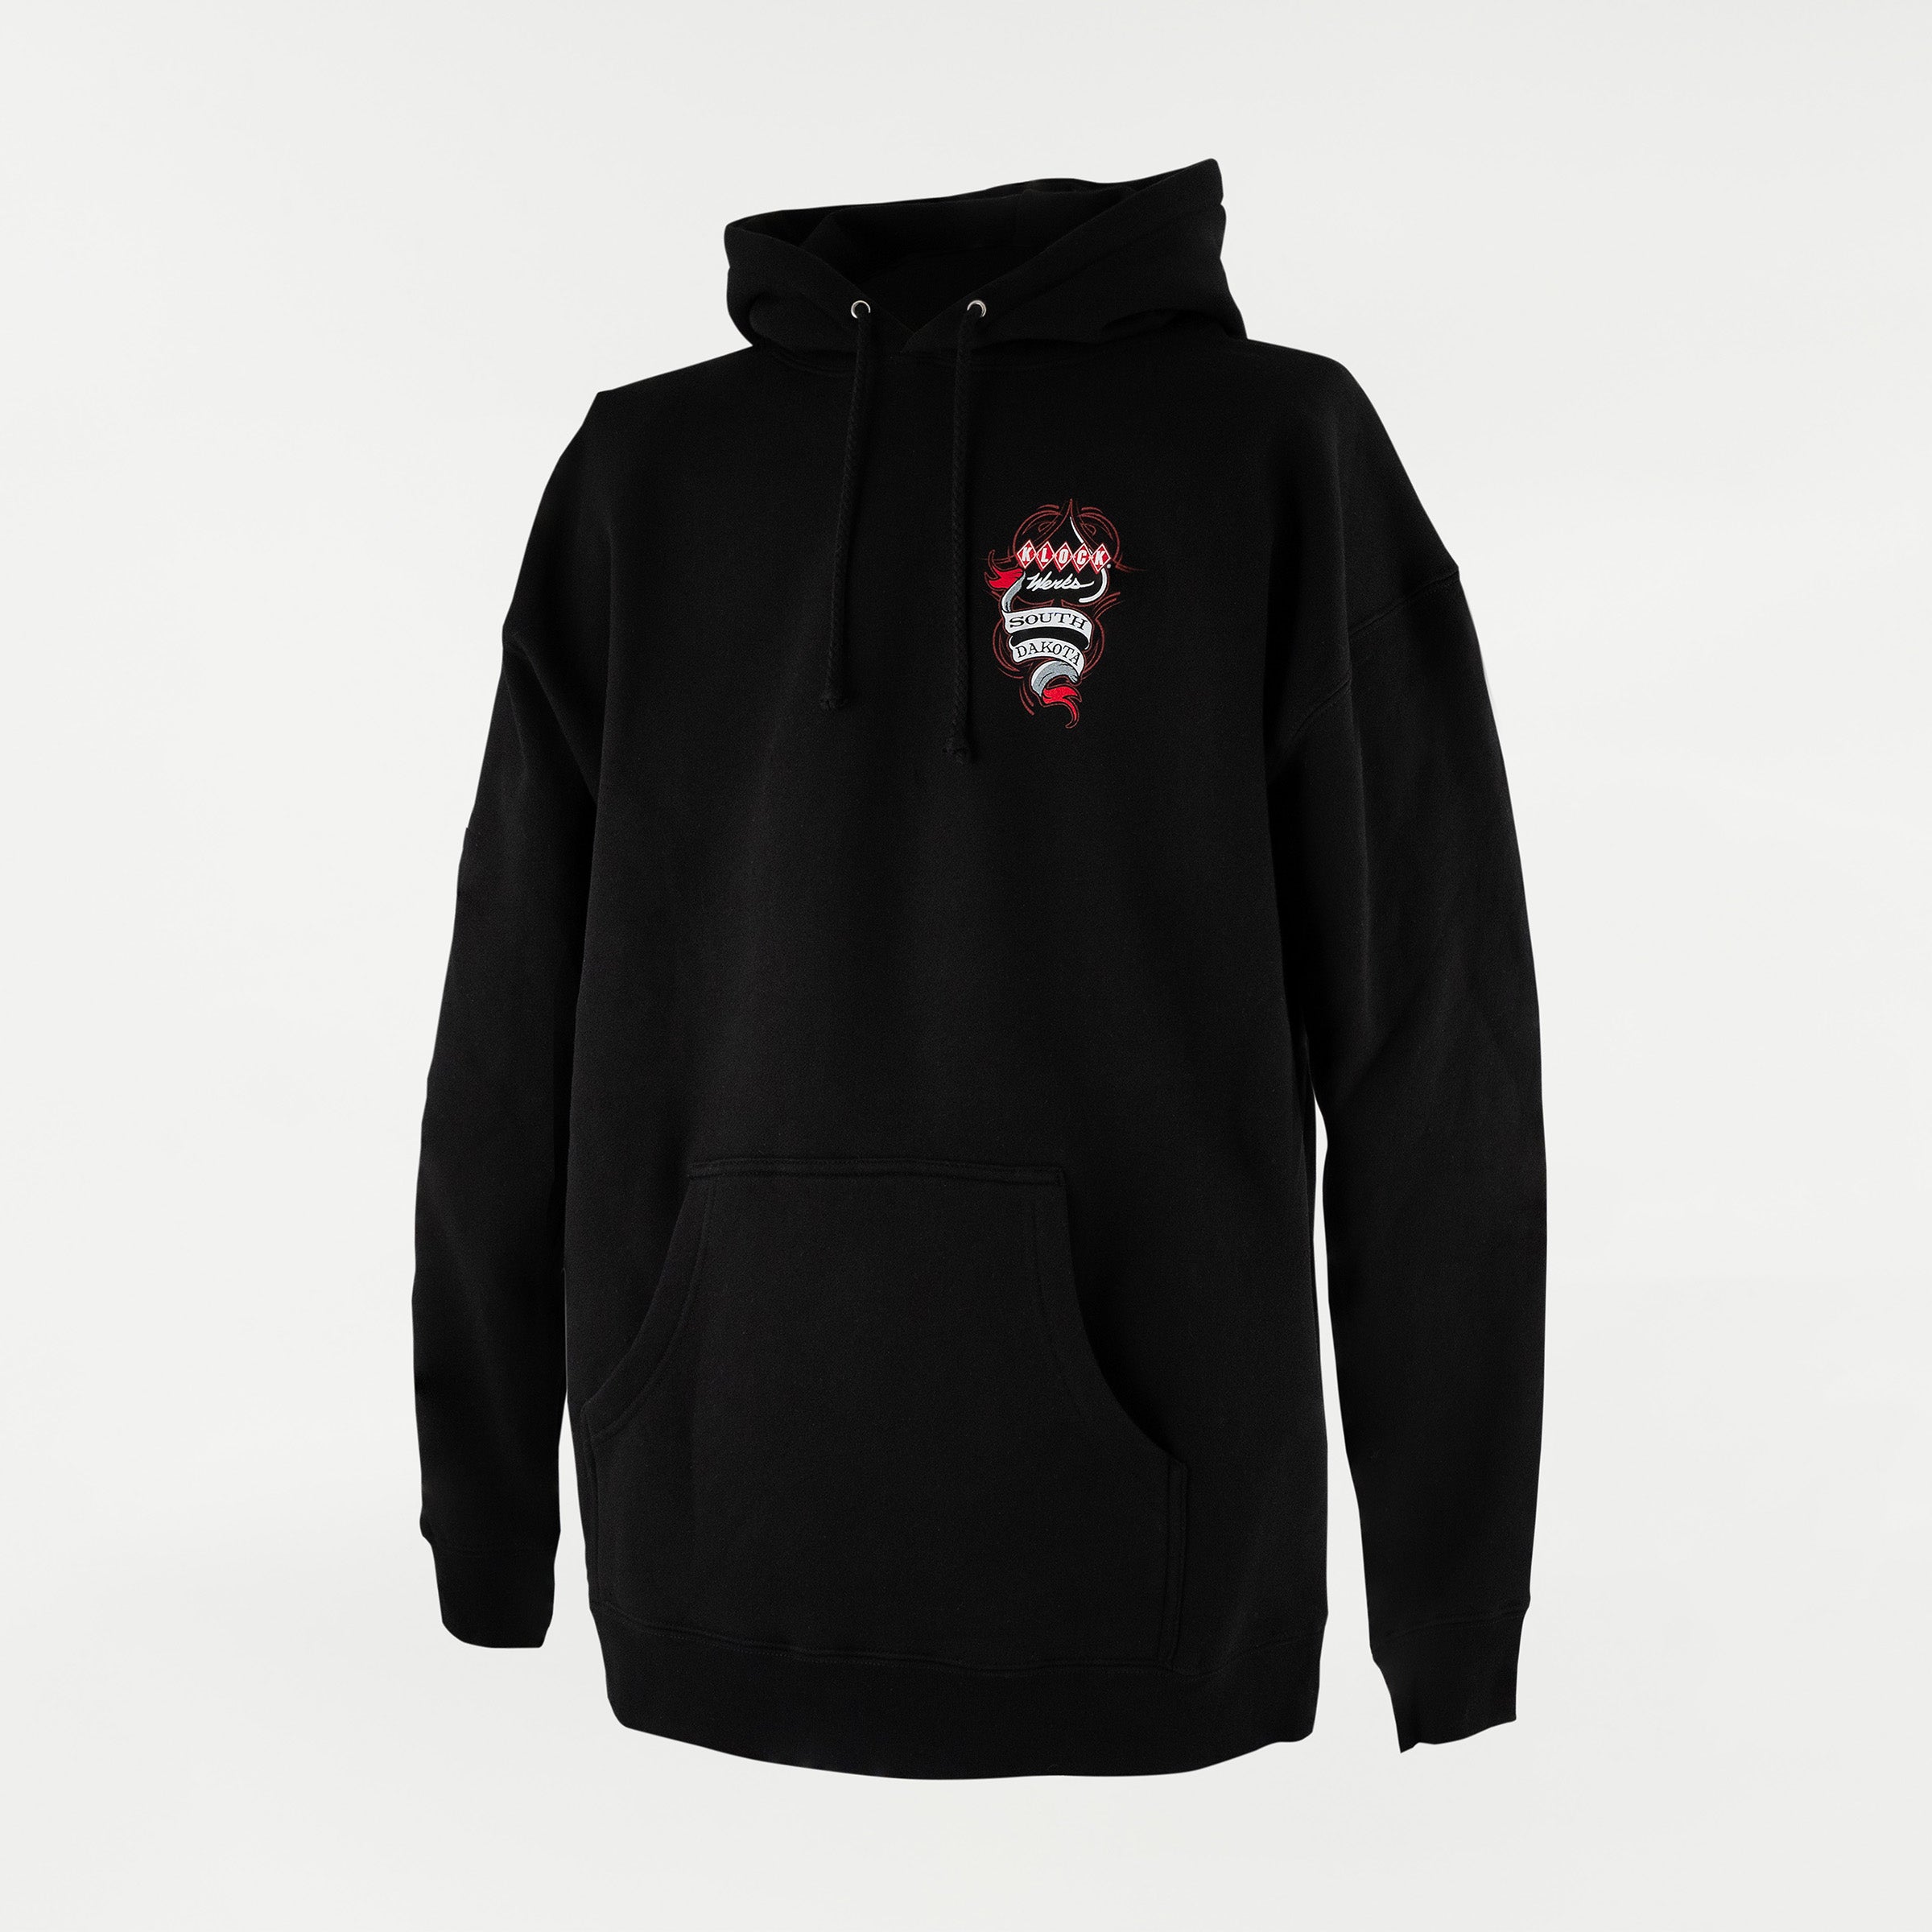 Black Pullover Hoodie with Spark Plug Design on Front Chest (Pullover)